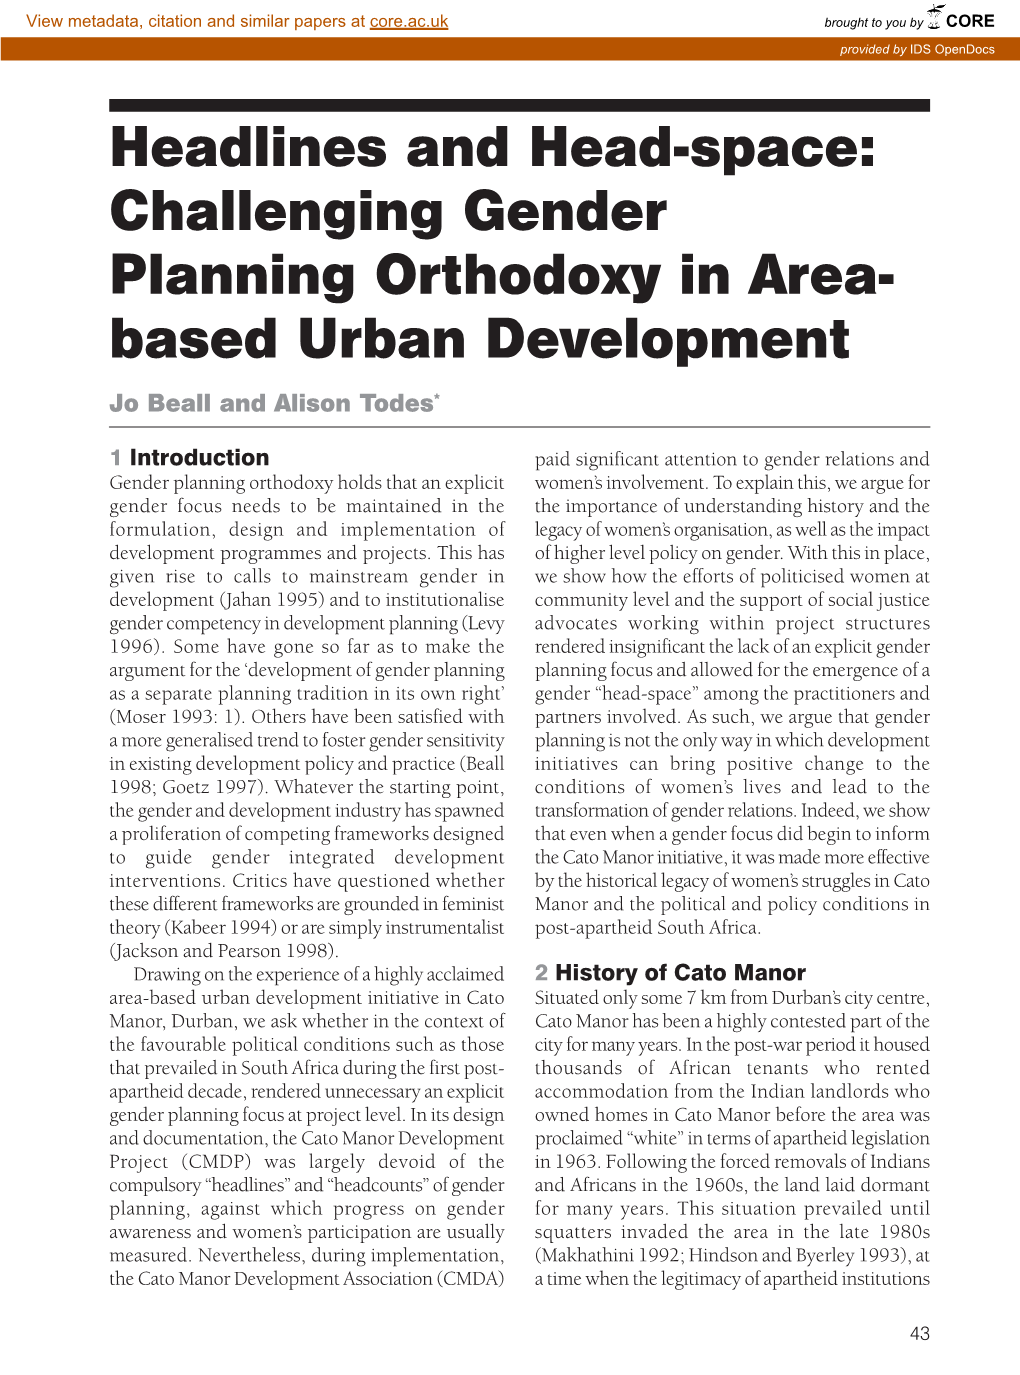 Challenging Gender Planning Orthodoxy in Area-Based Urban Development Operated in the Public Good